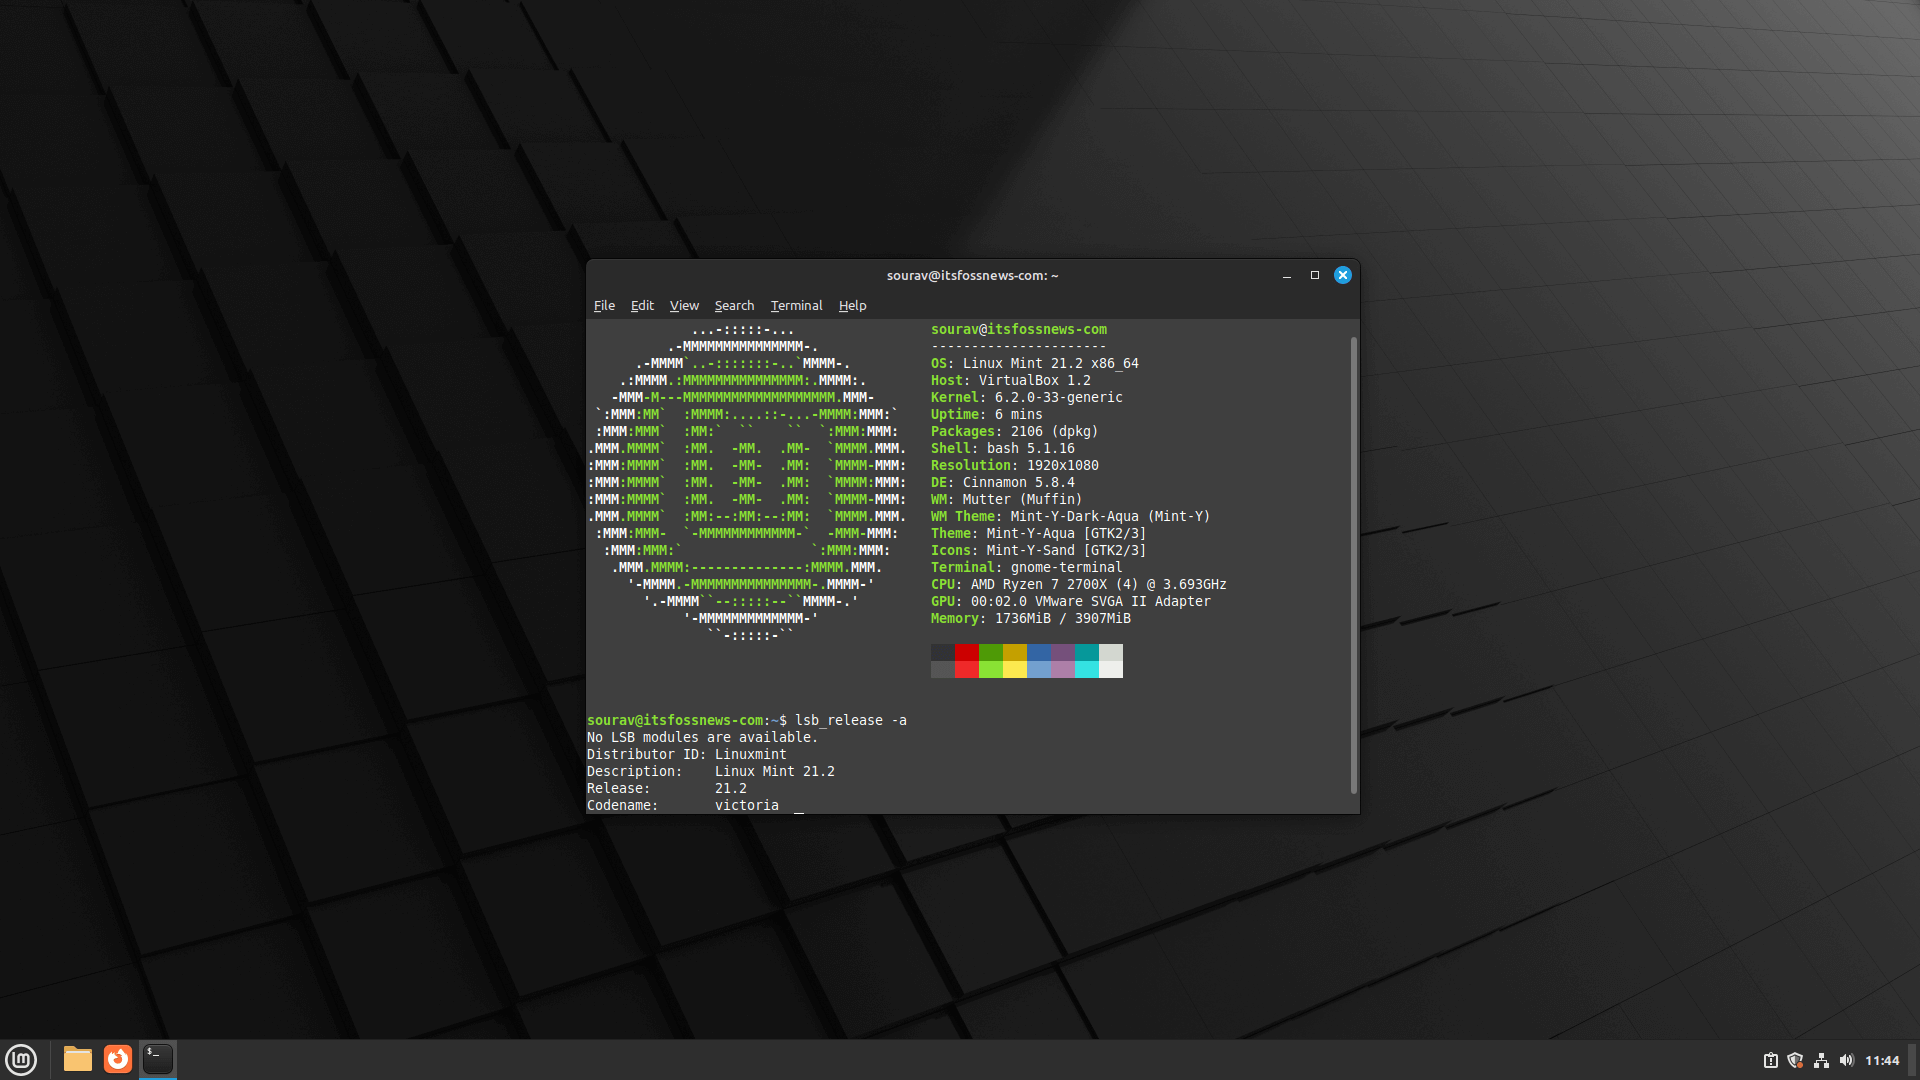 a screenshot of the neofetch output on linux mint 21.2 edge